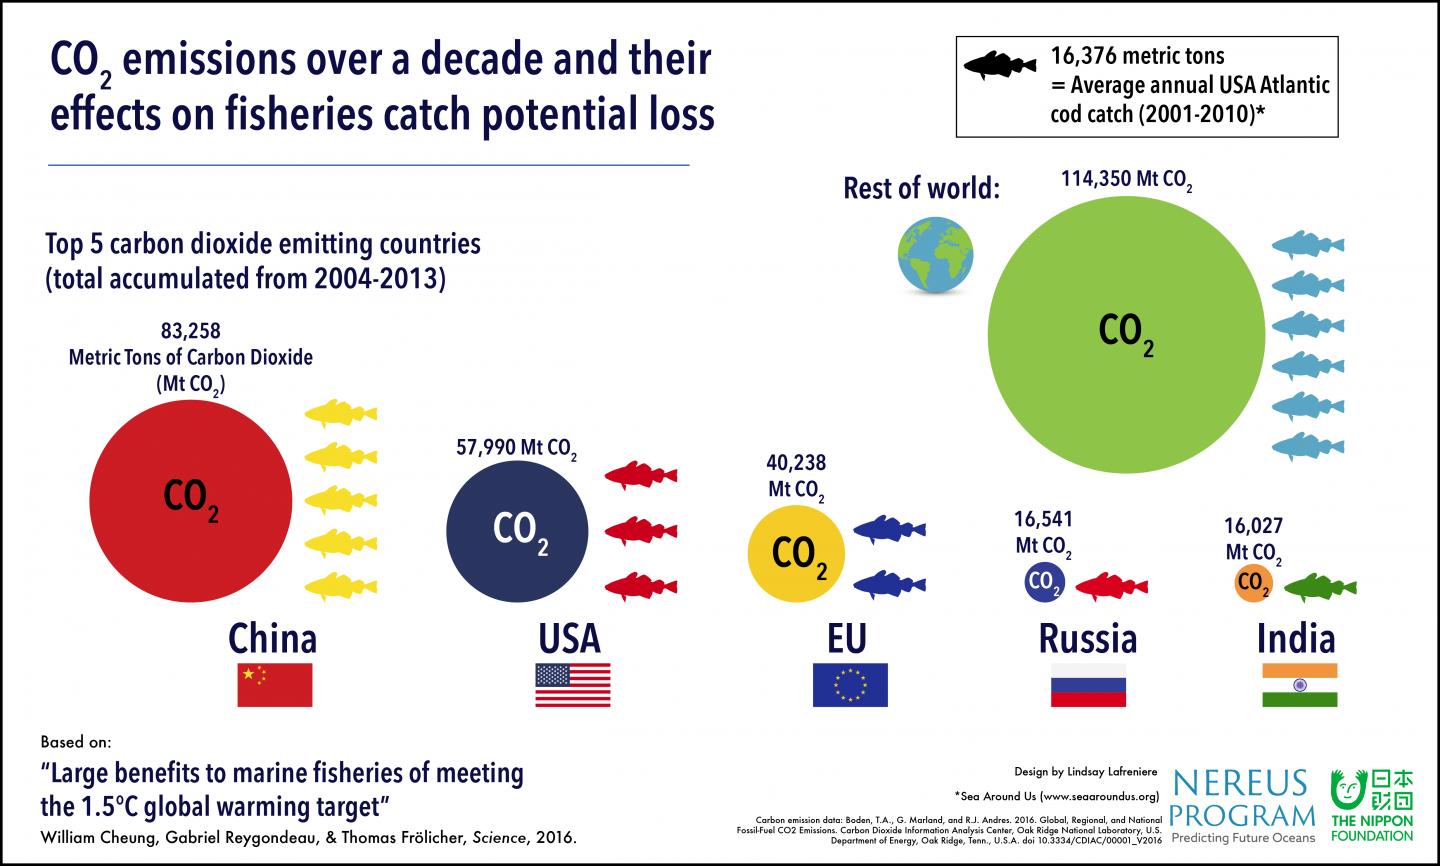 CO2 Emissions over a Decade and Their Effects on Fisheries Catch Potential Loss